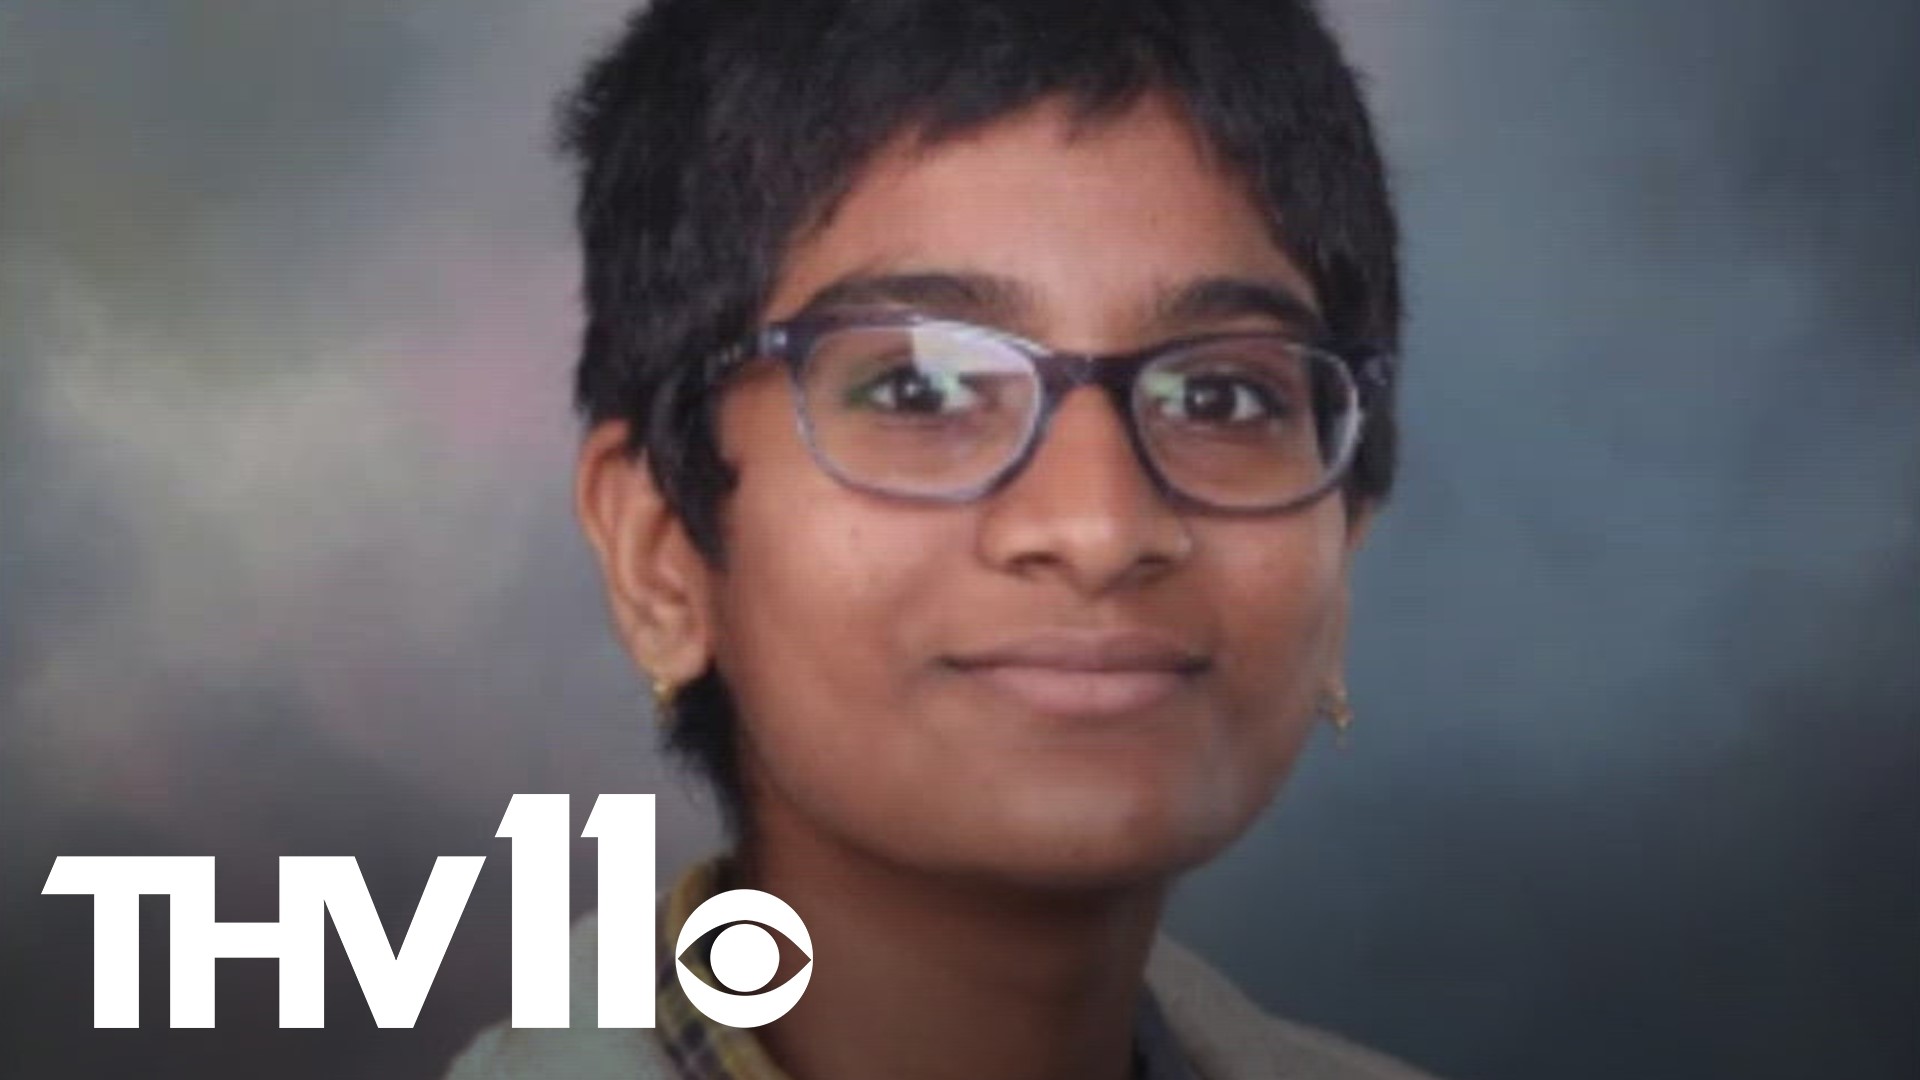 After being missing since January when she walked away from Conway Jr. High School, Tanvi Marupally has now been located safe in Florida.